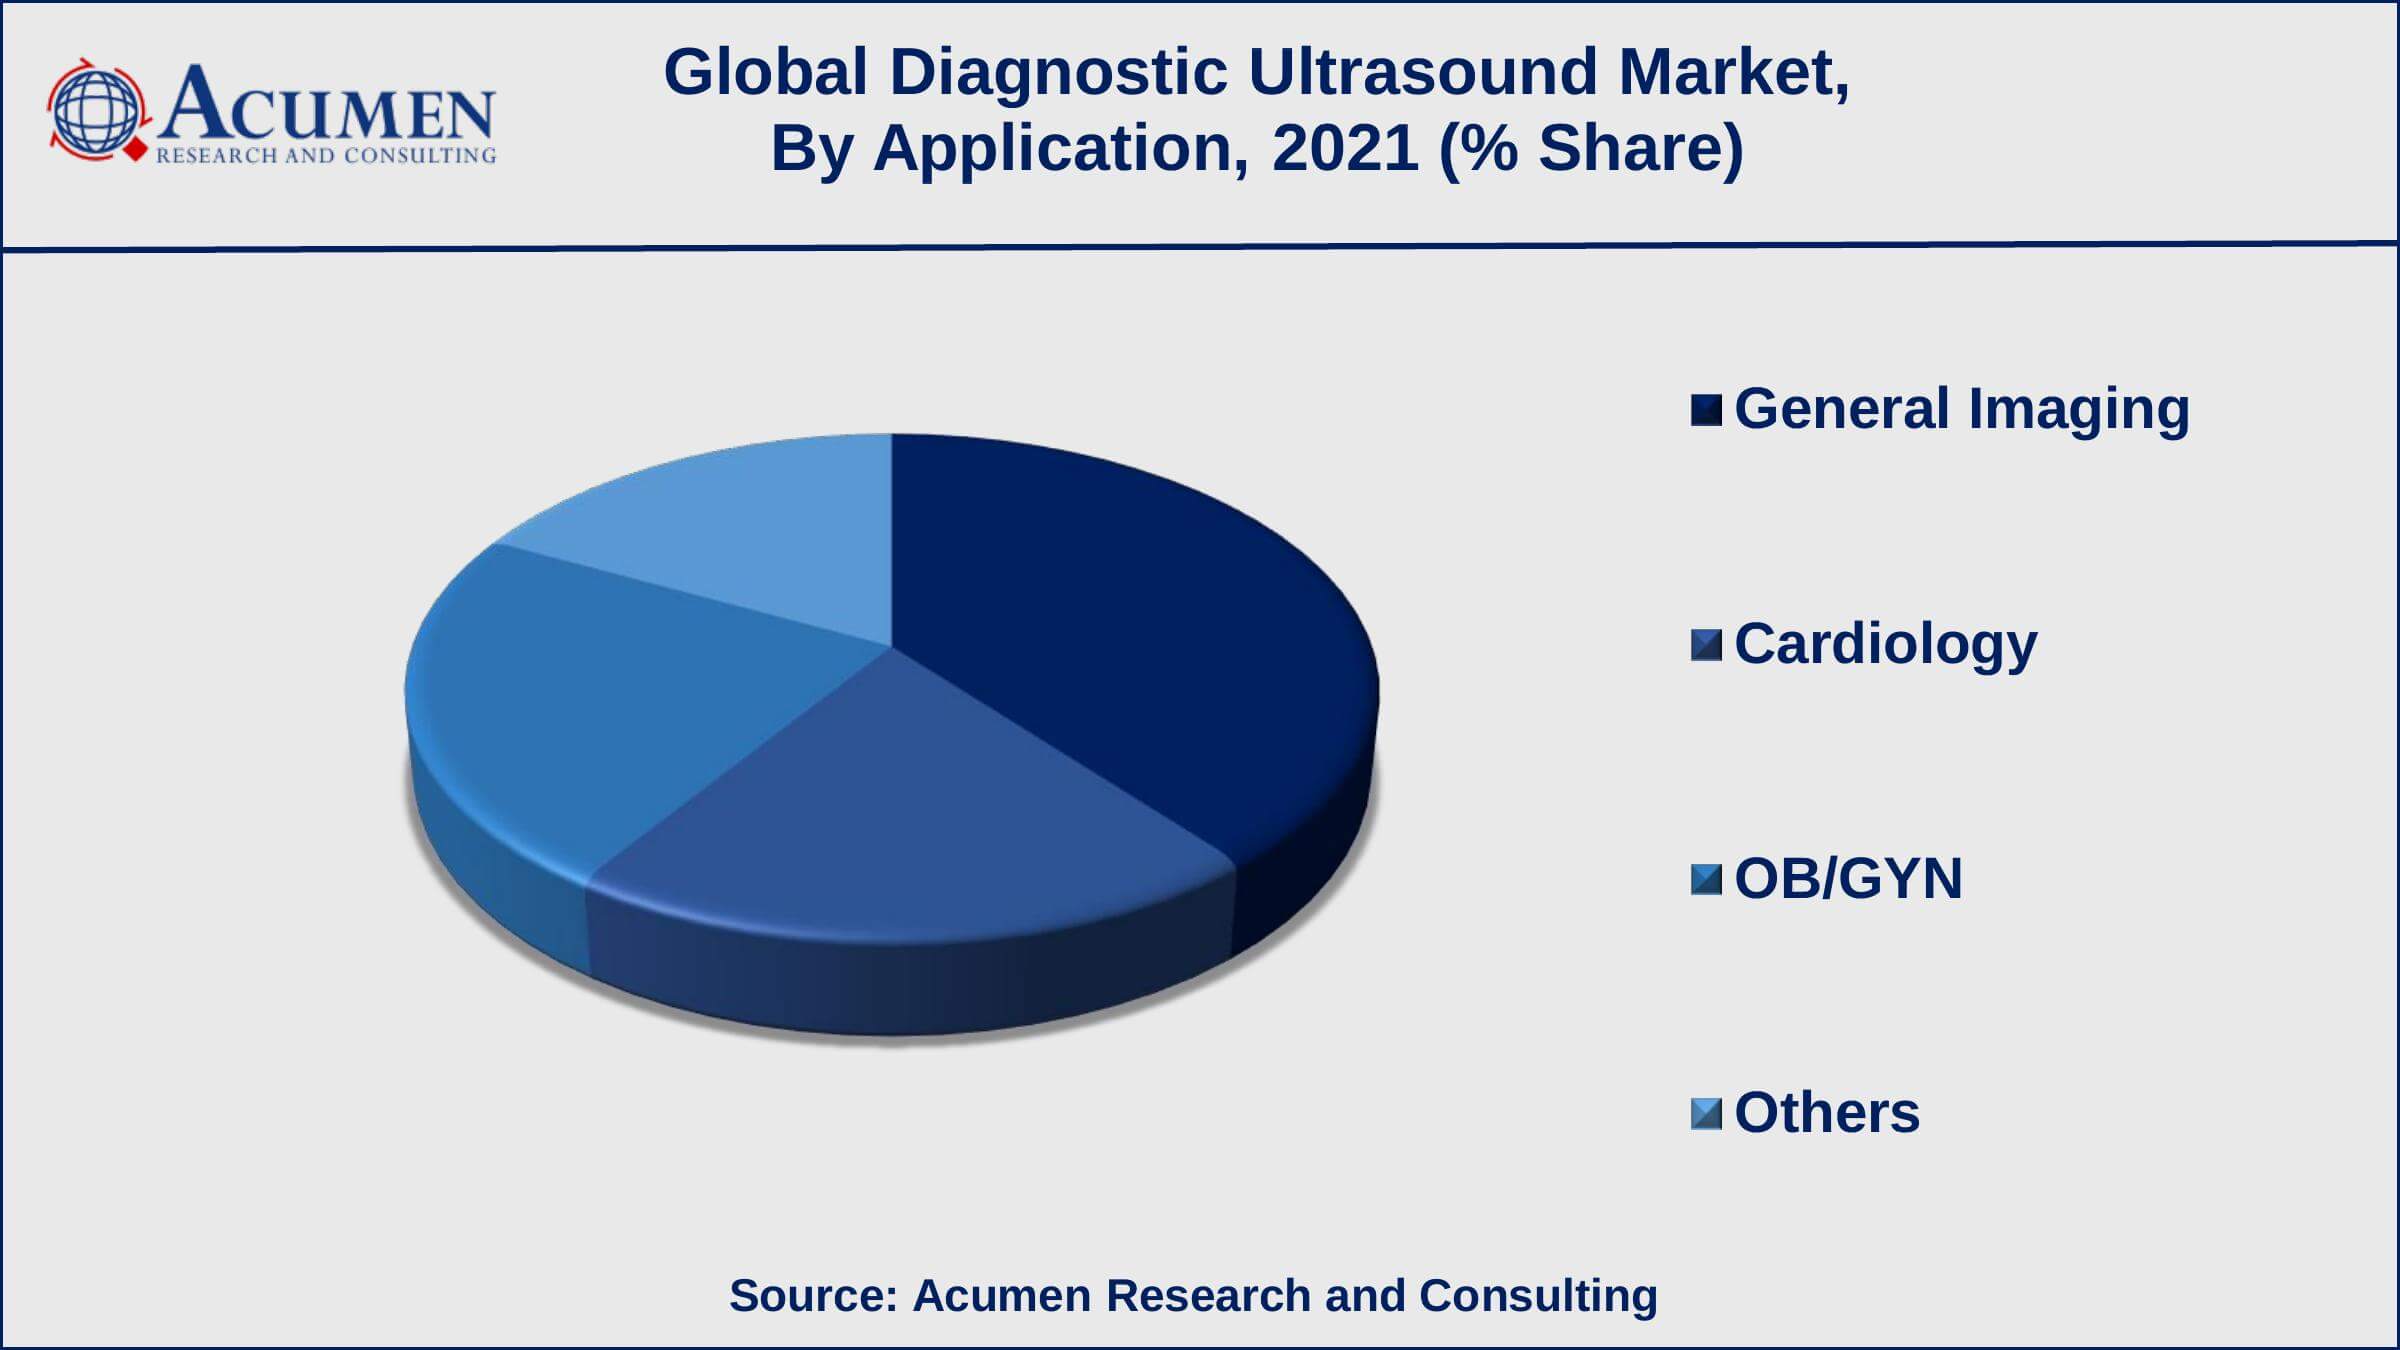 Among application, general imaging generated shares of over 39% in 2021